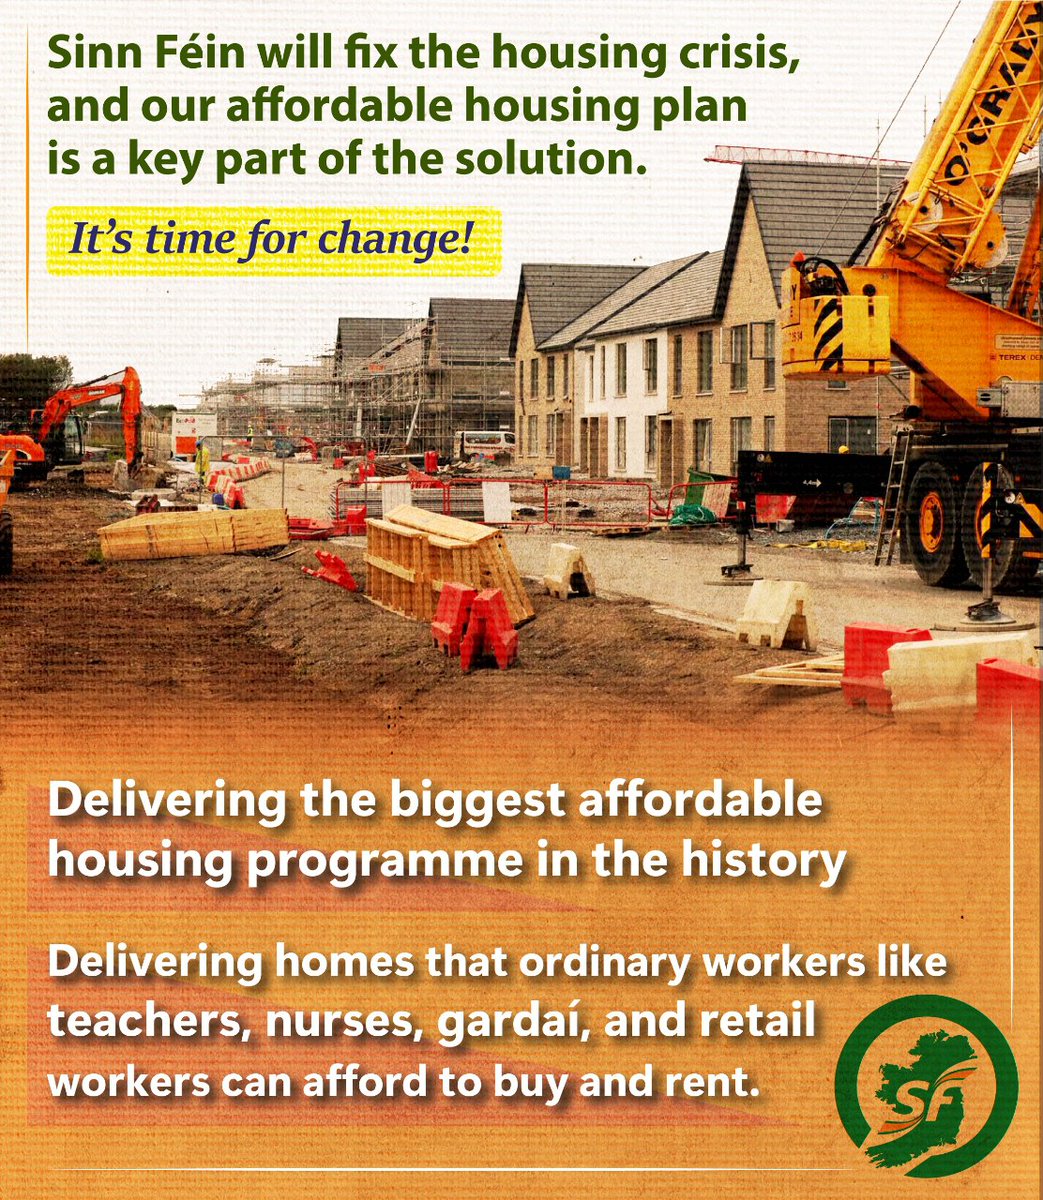 Sinn Féin will tackle the housing crisis

 Delivering the largest affordable housing program in history
 Delivery of houses that ordinary workers such as teachers, nurses, guards and workers can afford to buy and rent

 #time4change